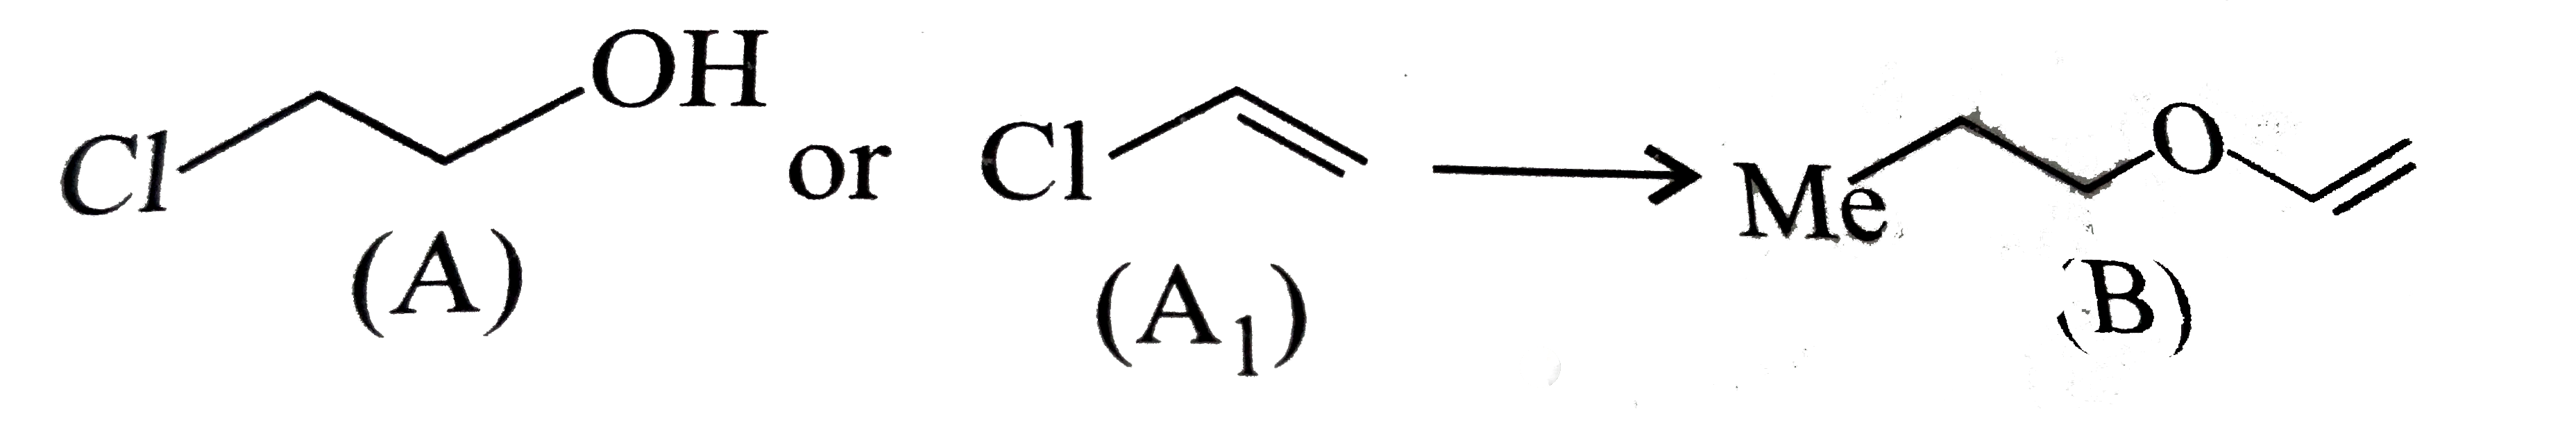 Explain why in the synthesis of ether (B) using (A) or A(1) all the three standard methods for the perparation of ether (B) fail, i.e.,   I.  Intermolecular dehydration of alcohols   II.  Alkoxy mercuration-demercuration method   III. williamson's synthesis   Suggest an alternative method for the preparation of (B) by using (A) or (A(1)) .